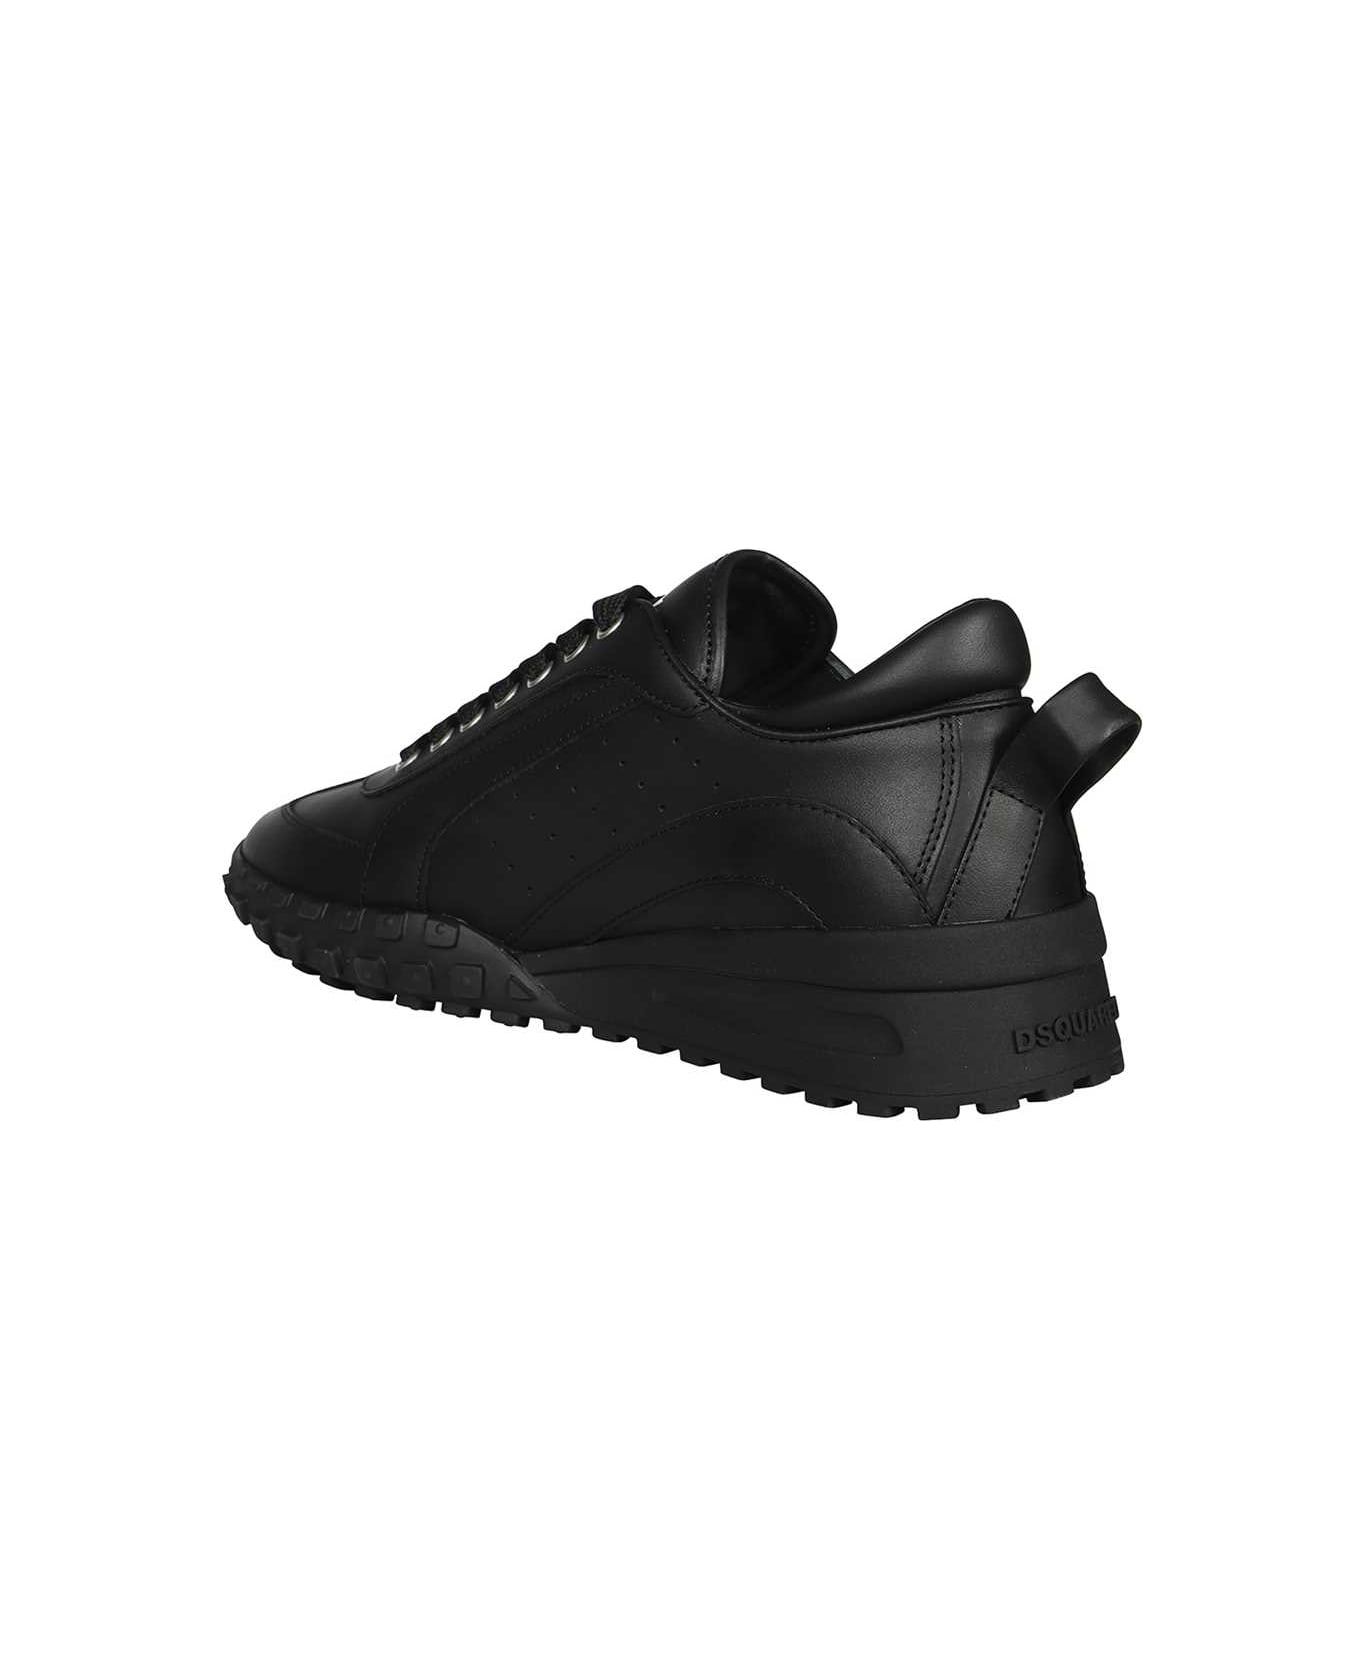 Dsquared2 Legend Low-top Sneakers - black